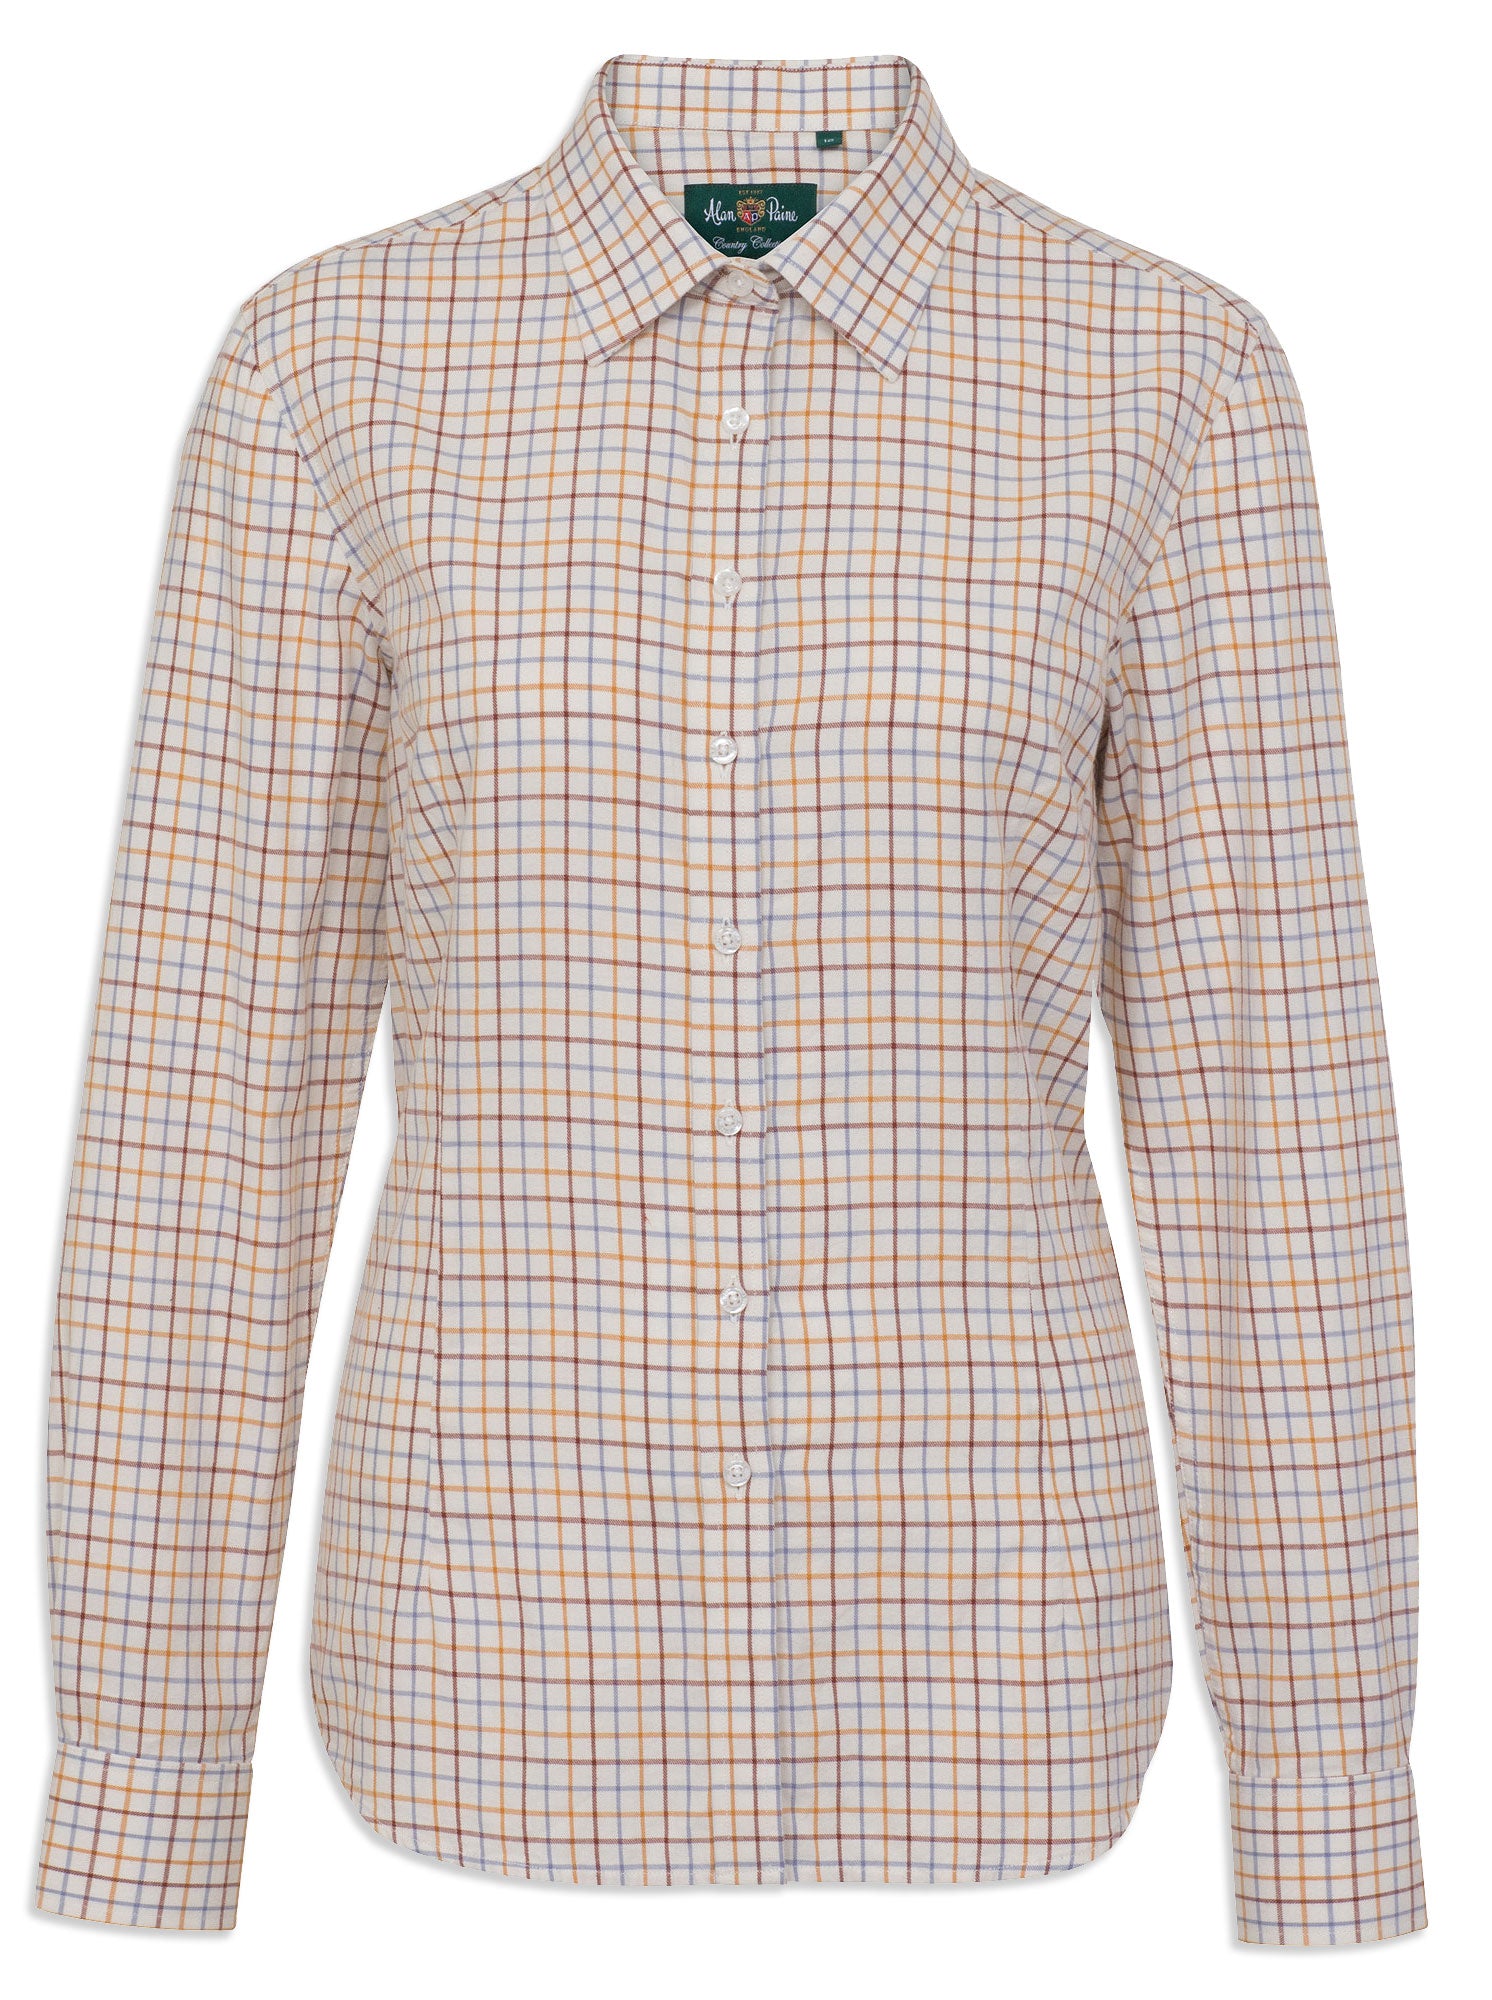 Alan Paine Bromford Ladies Shirt | Country Check  